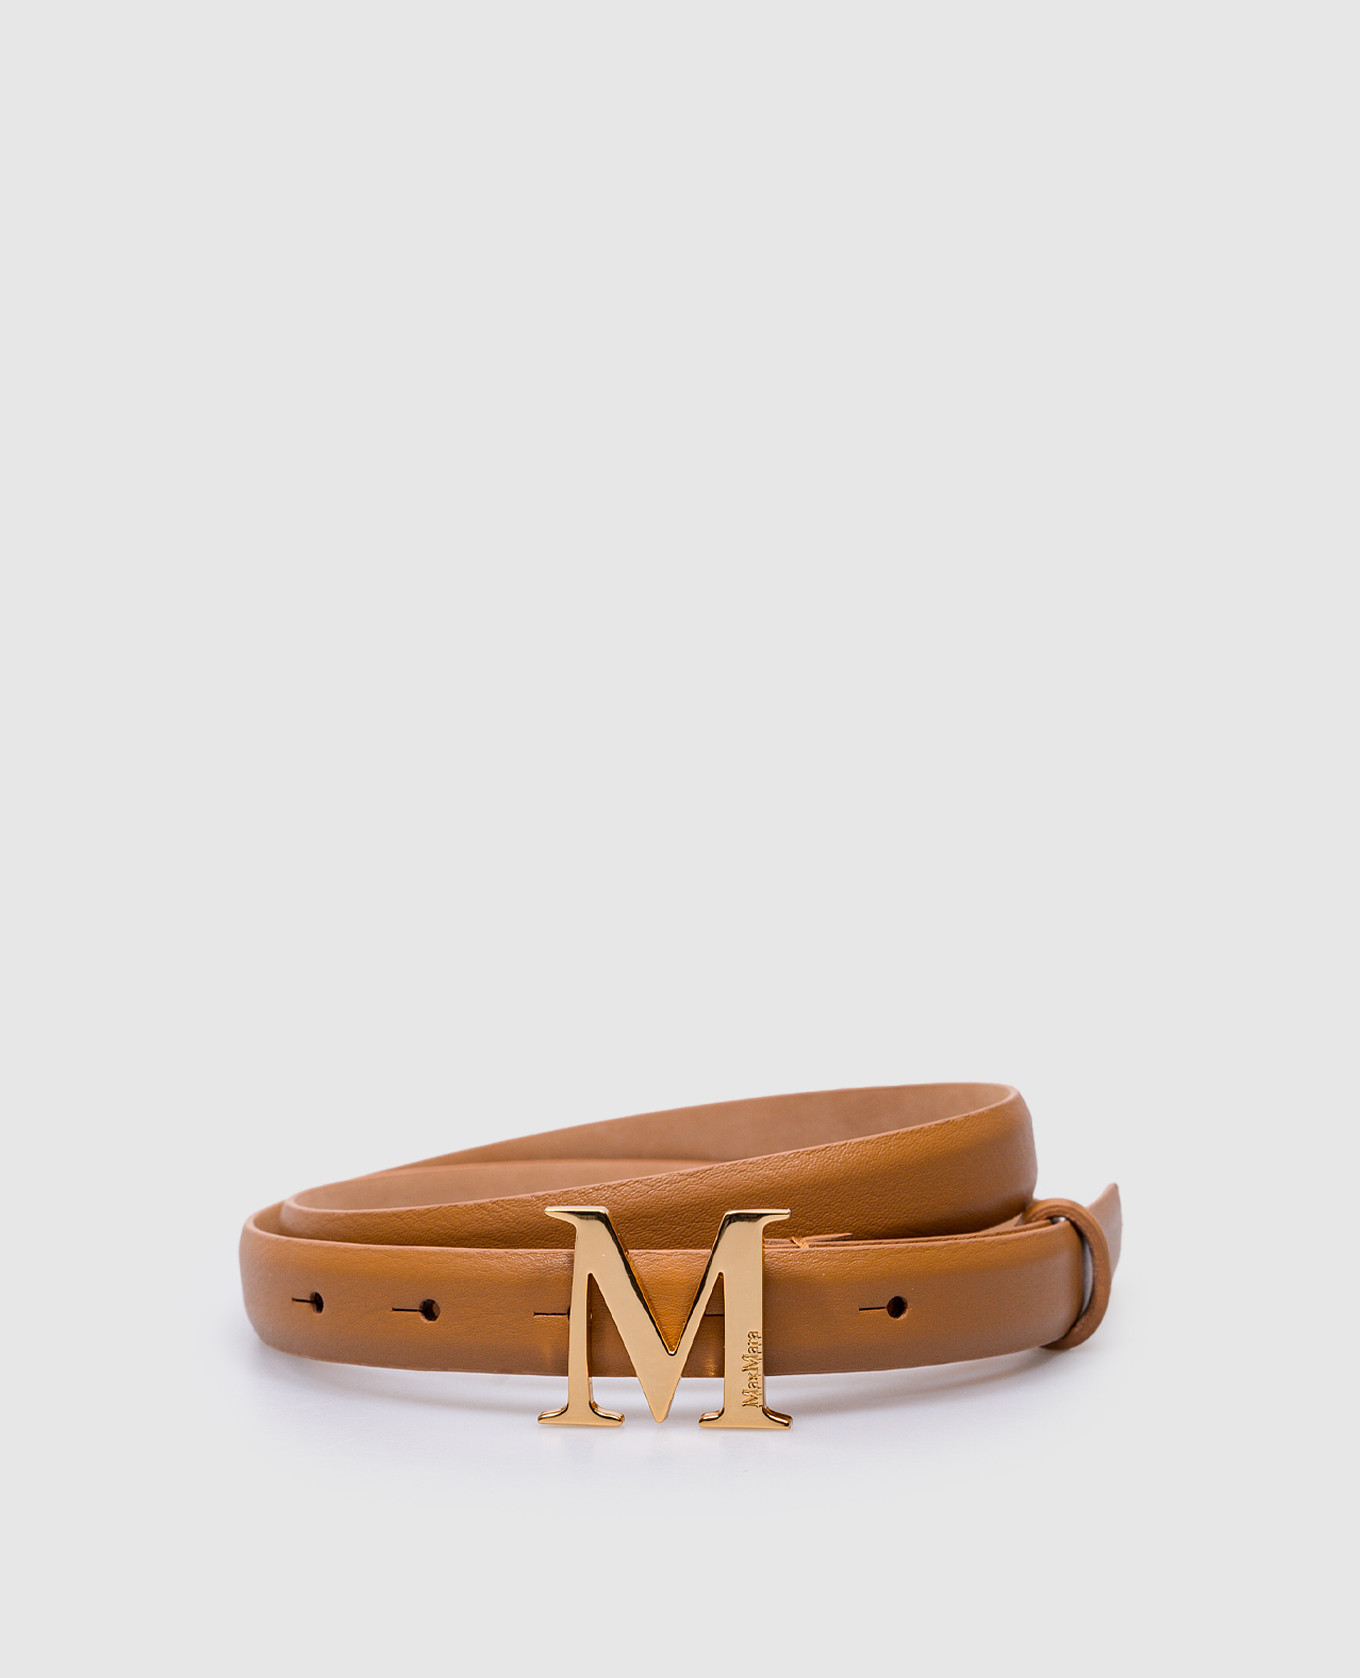 CLASSIC beige leather belt with logo engraving